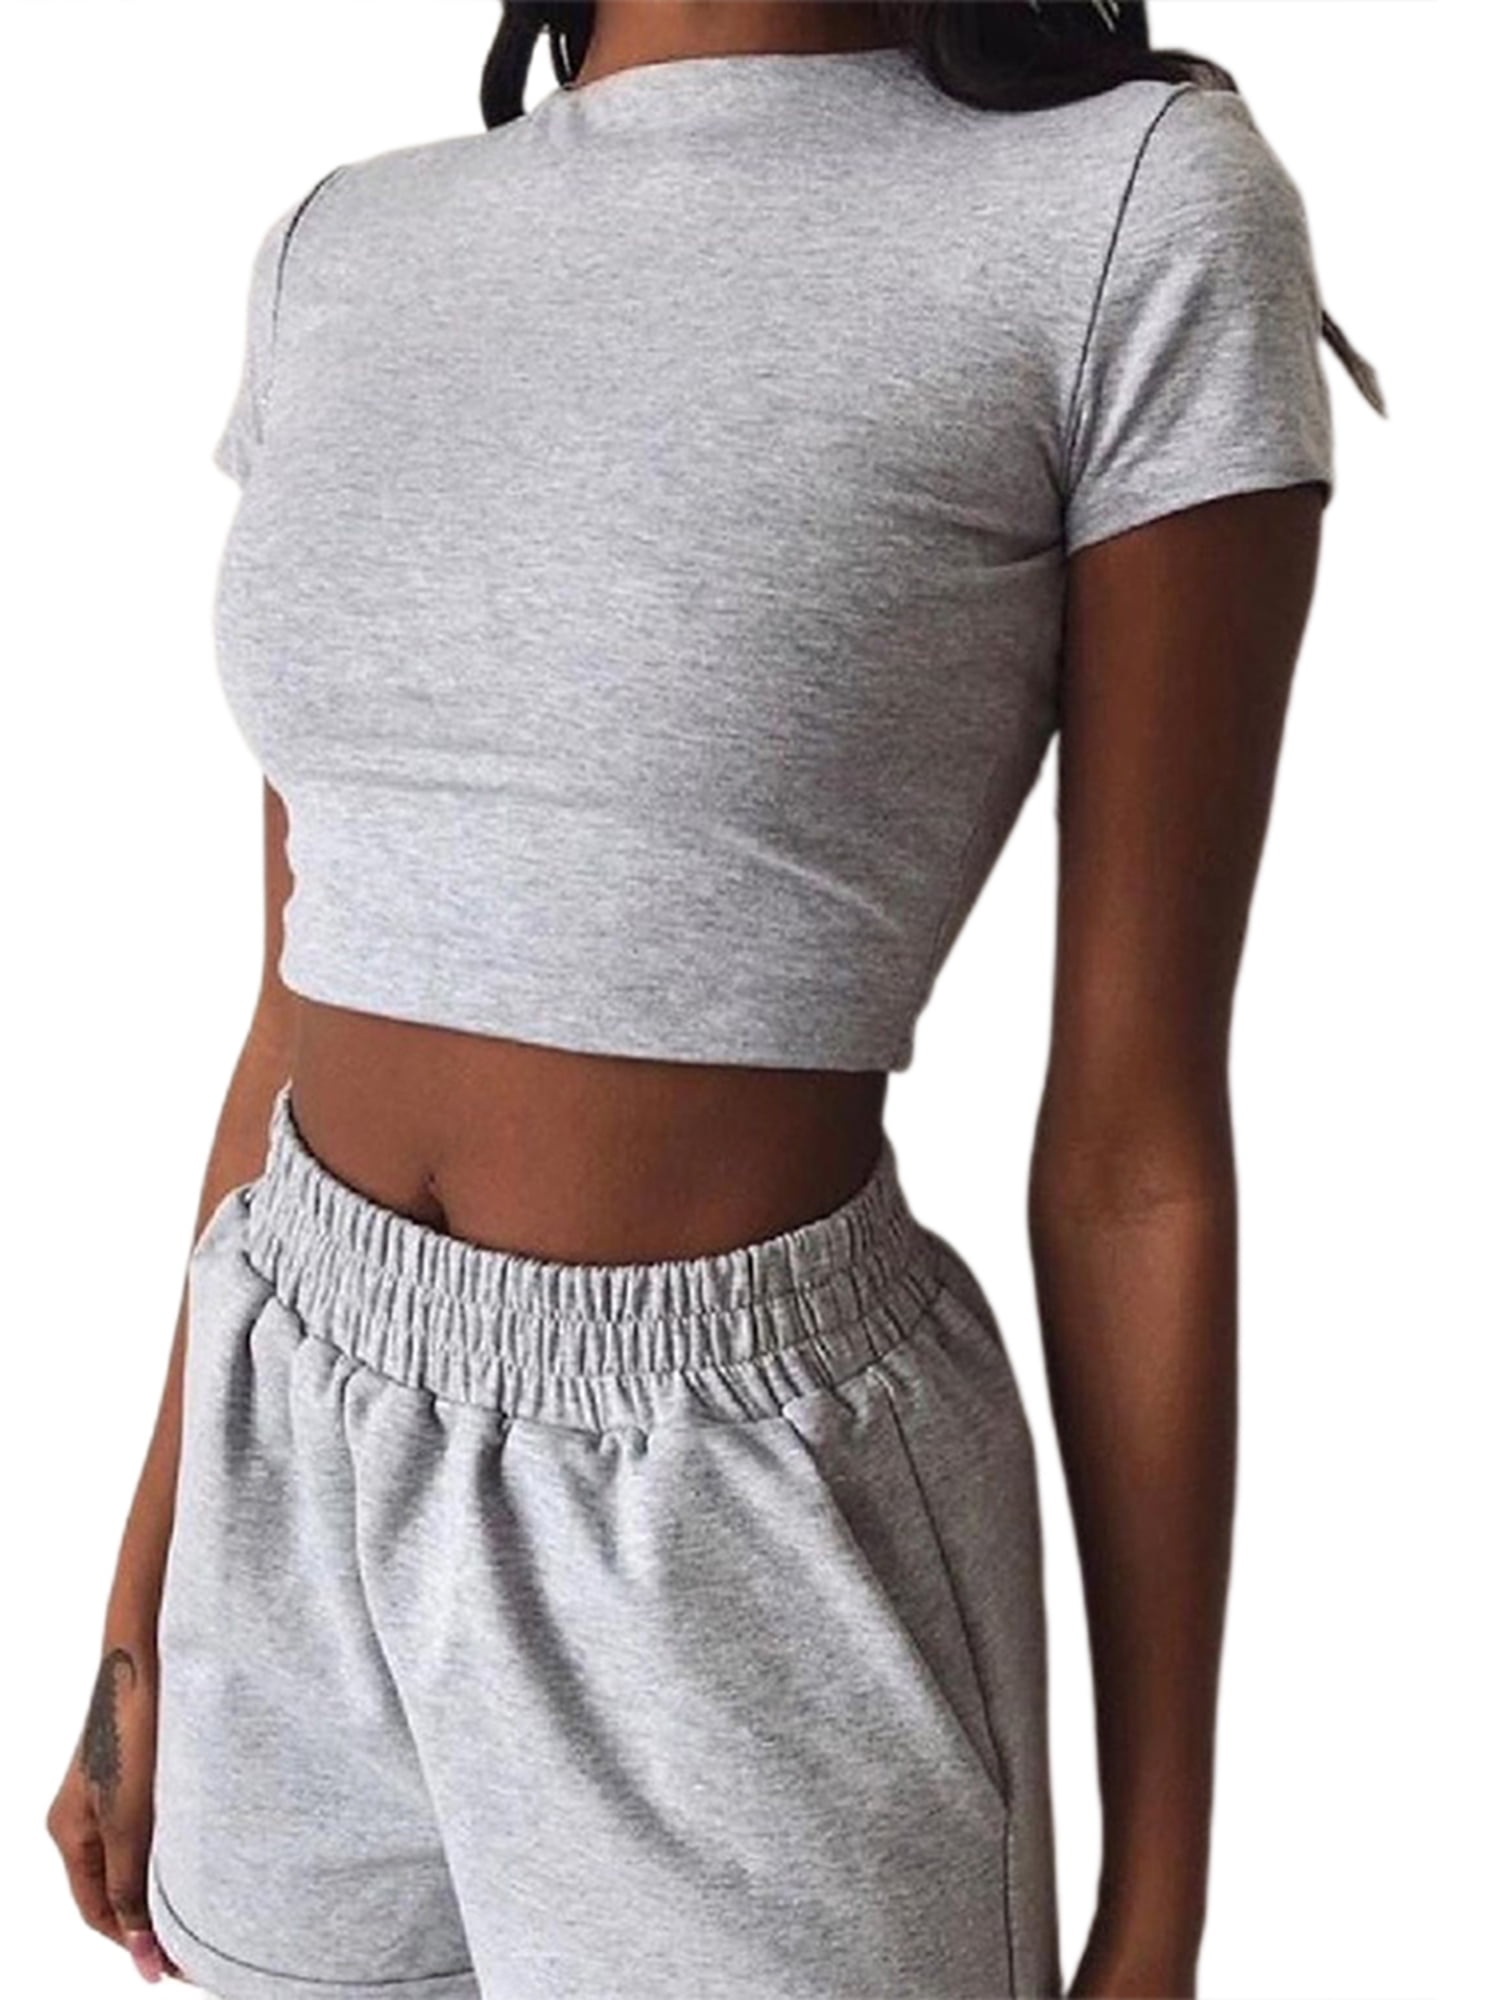 Summer Athleisure Set: Womens Casual Solid Shorts And Crop Top Womens Short  Tracksuit With Drawstring Shirts Perfect Matching Sportswear Outfits From  Clothes182, $14.08